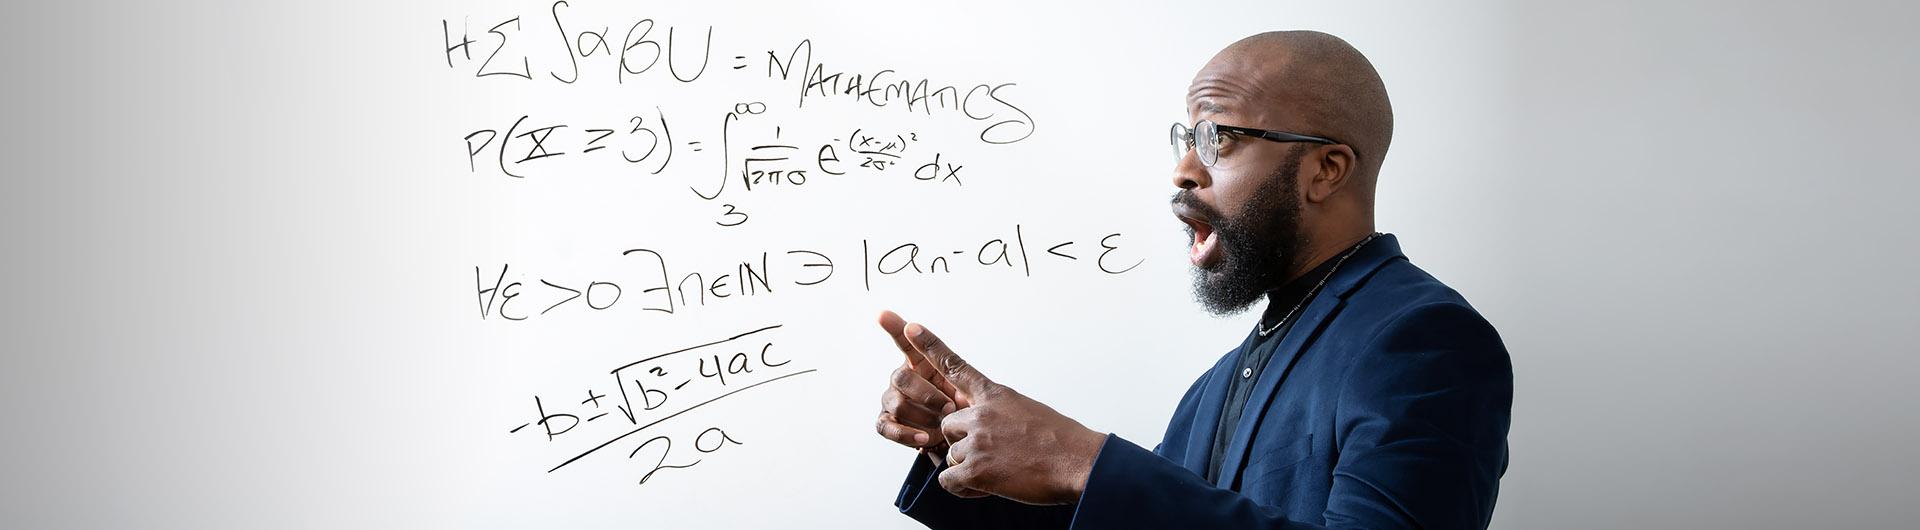 Professor Kagba Suaray points to math terms